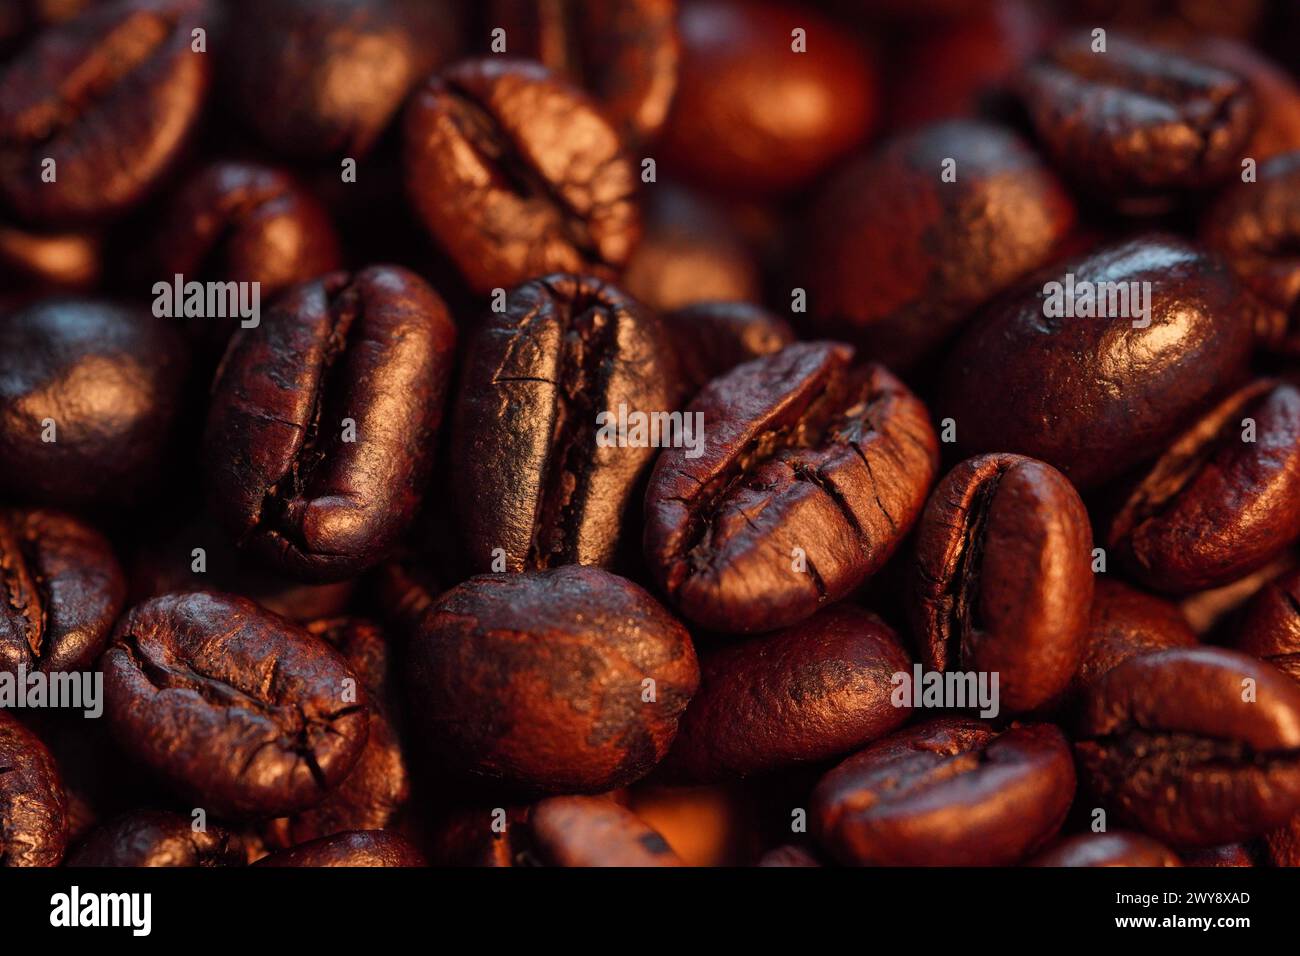 Roasted coffee beans (needle roast), Cafe and coffee shop concept Stock Photo